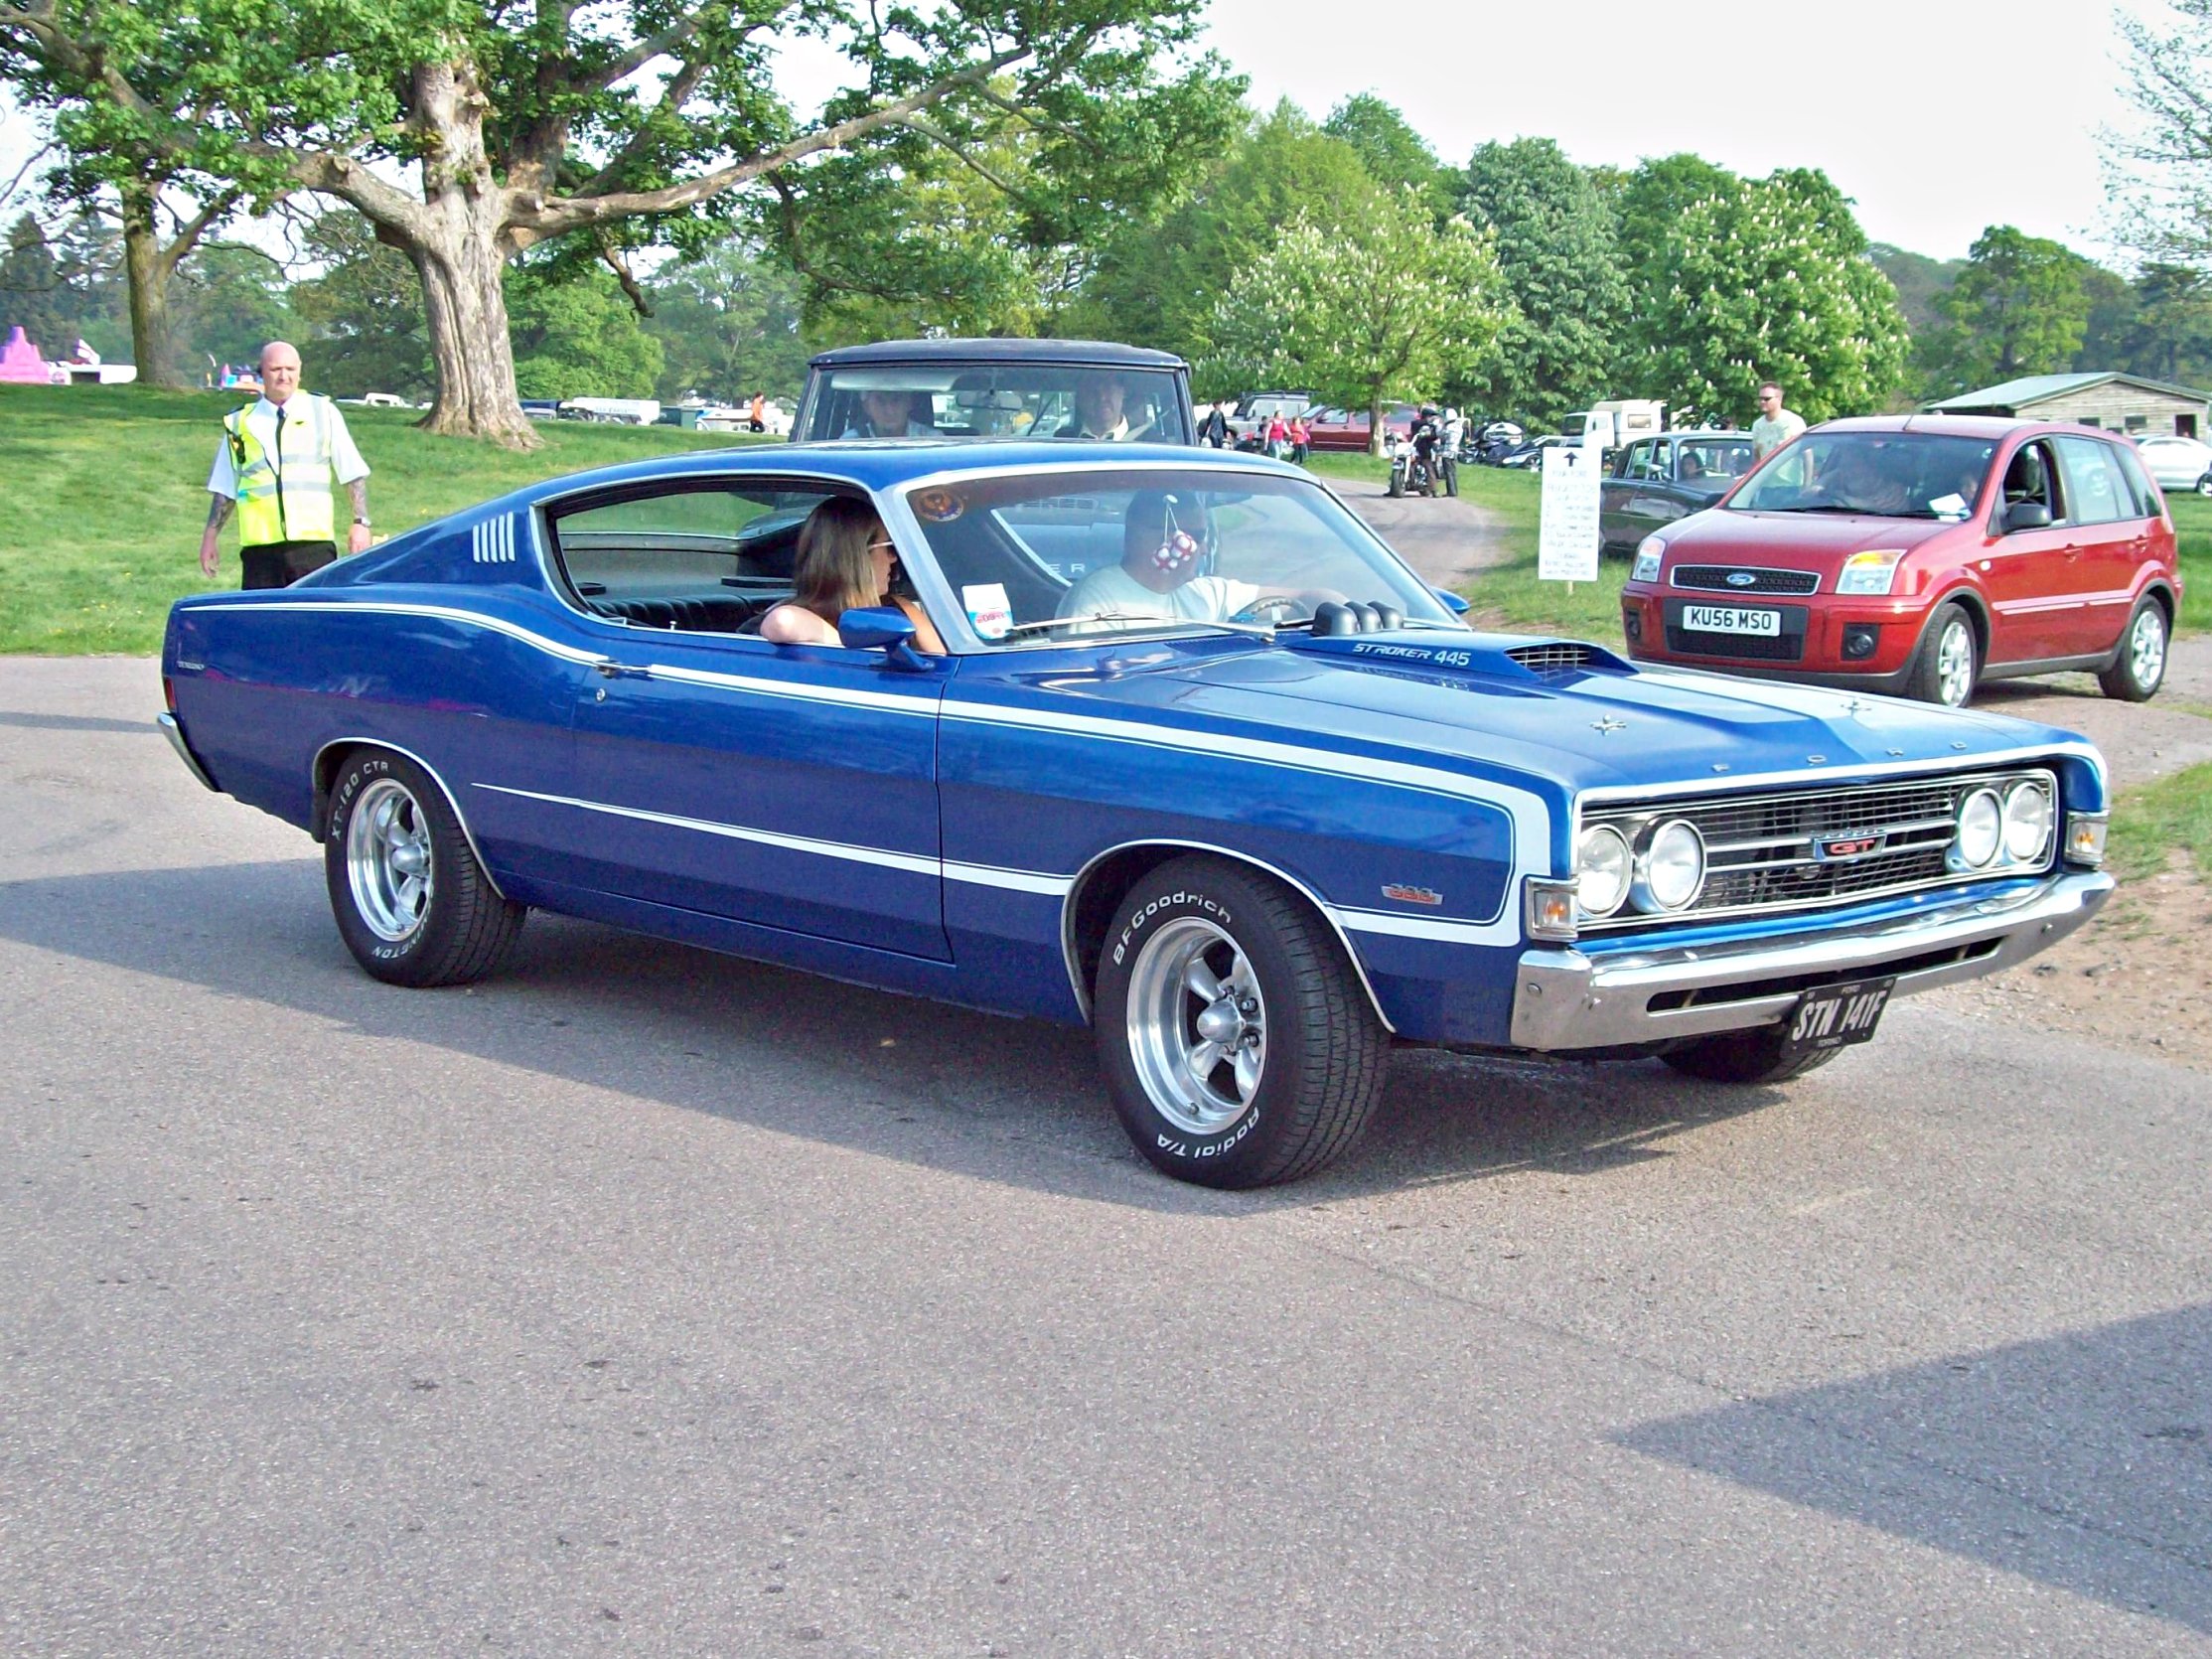 Ford Torino Gt Wallpapers